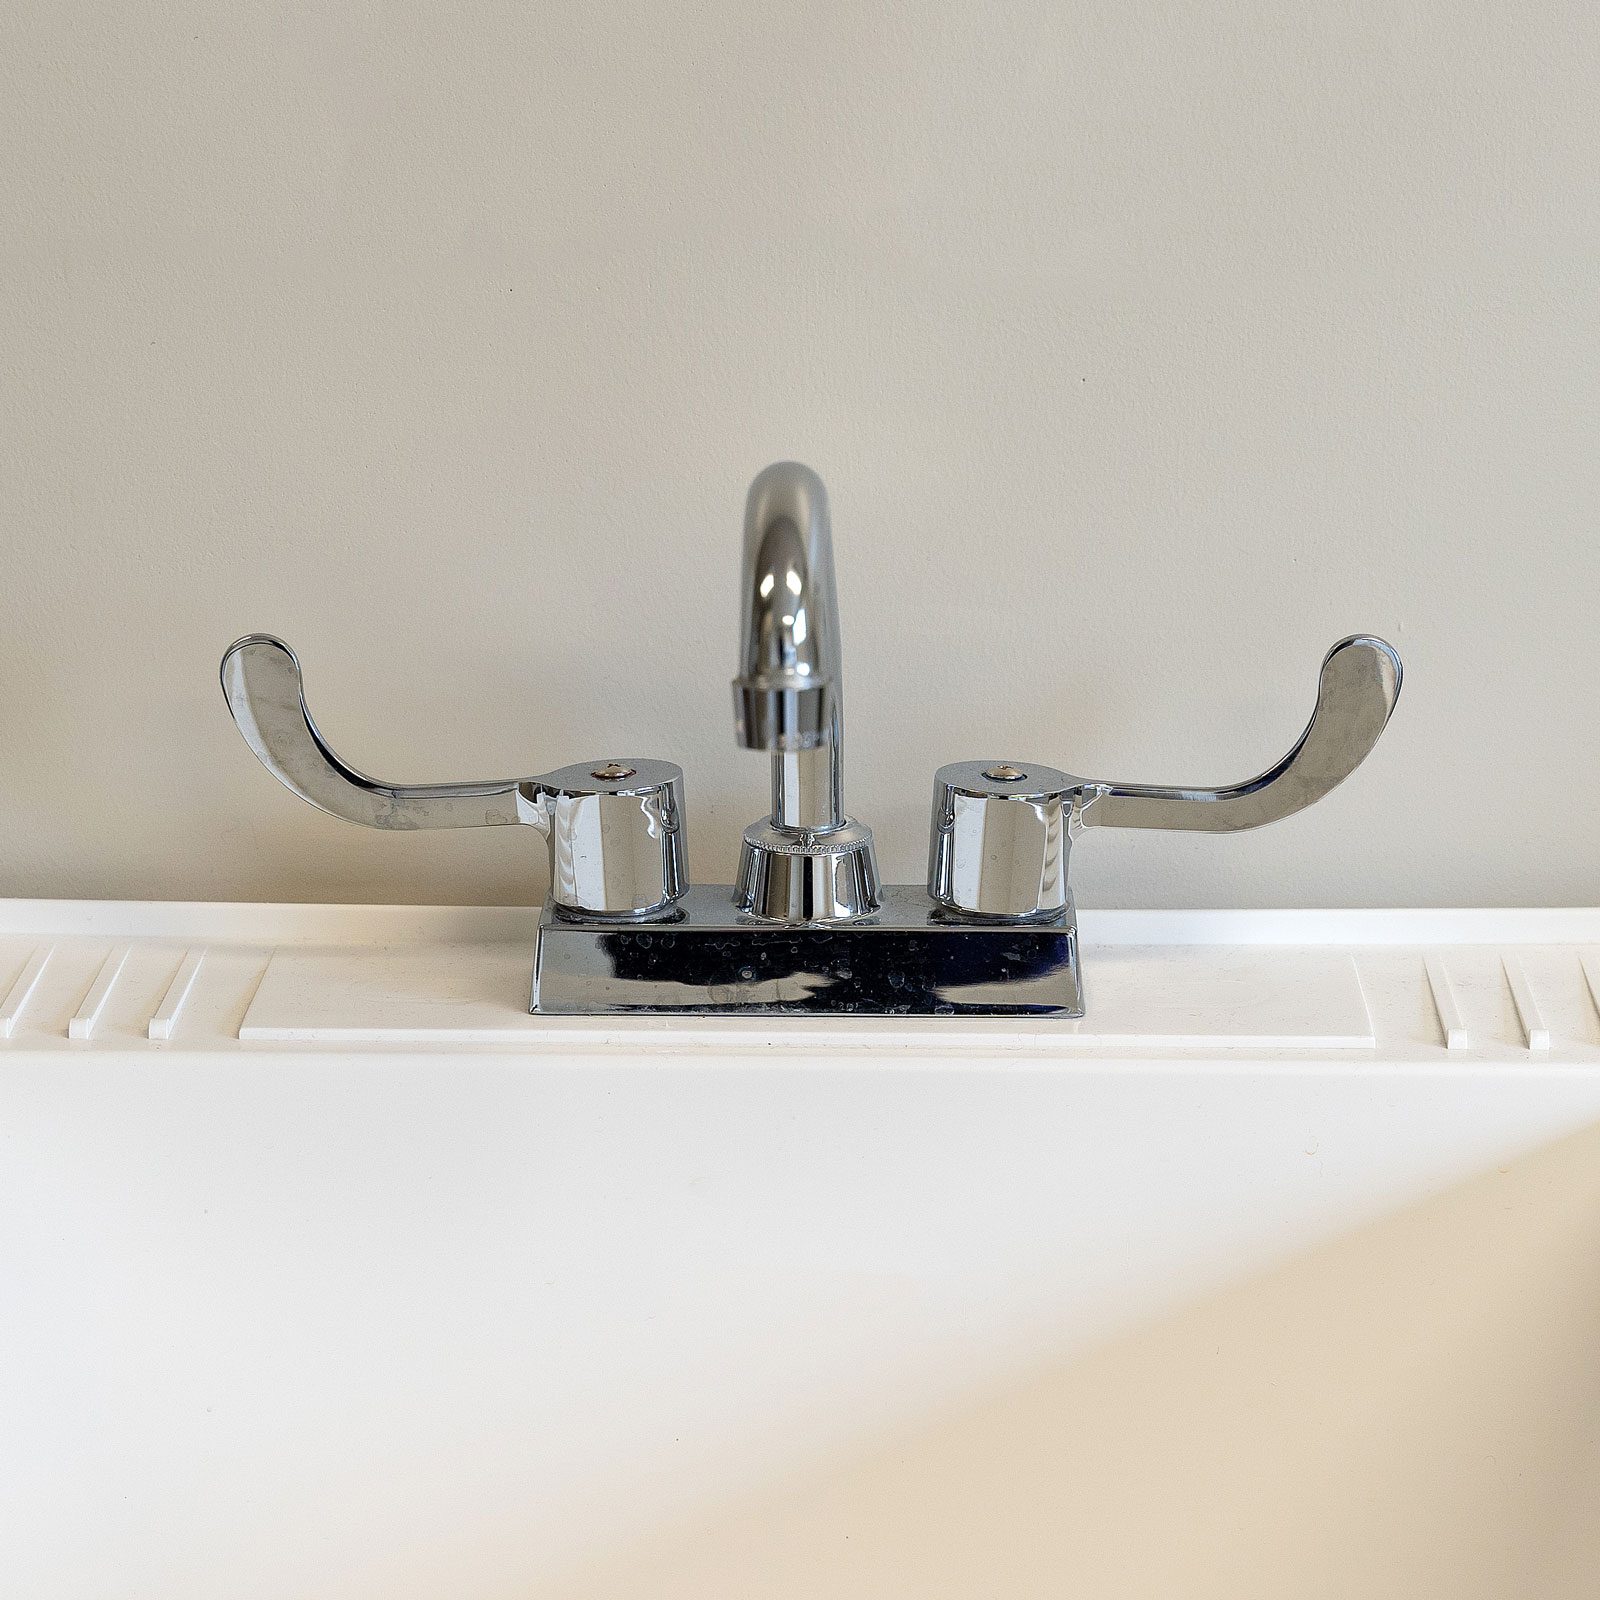 How To Fix a Leaking Faucet in the Laundry Room